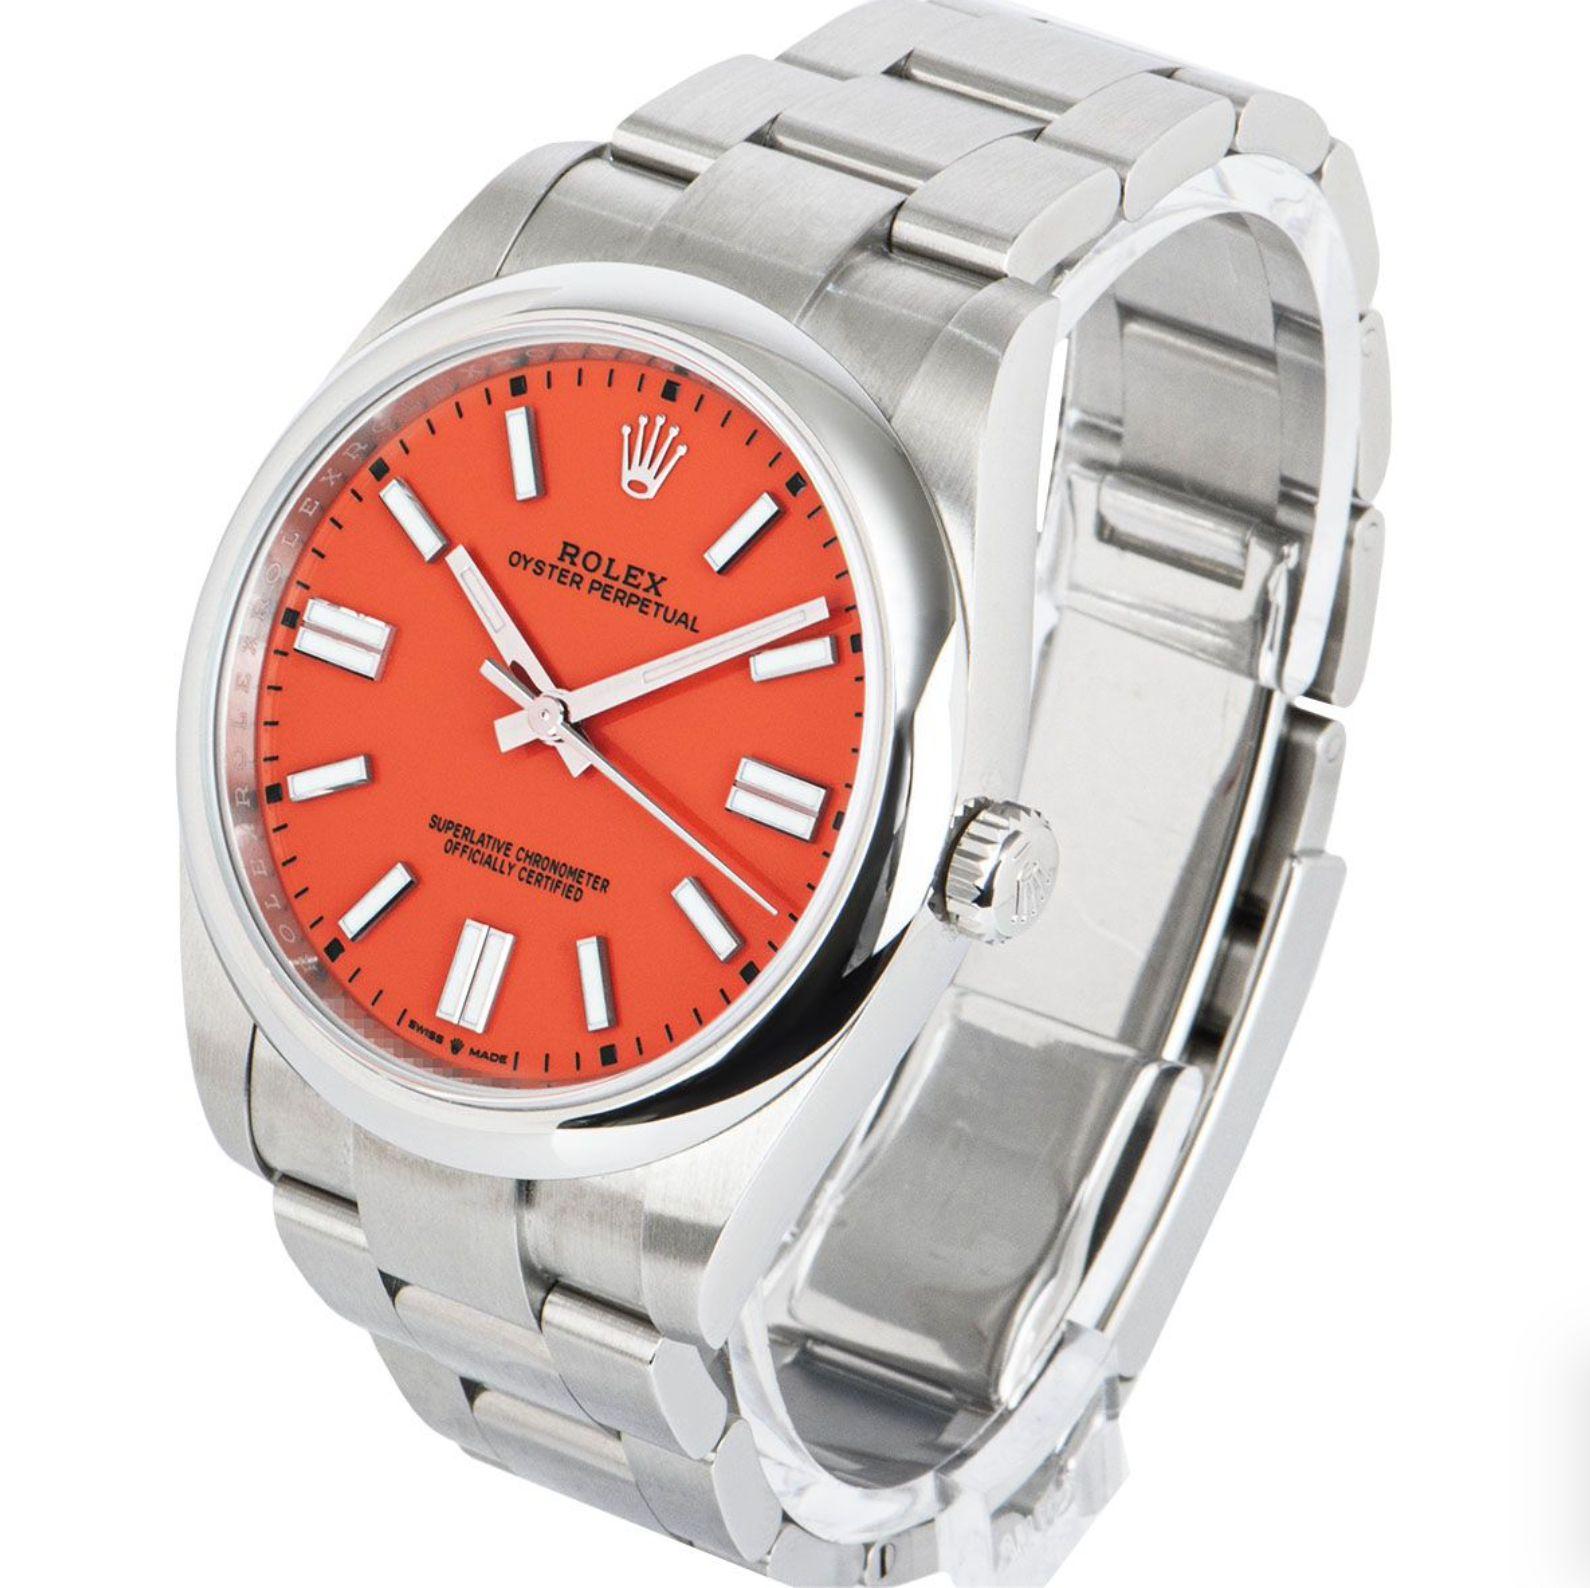 Taille ronde Rolex Oyster Perpetual Coral Red Dial 124300 Montre en vente